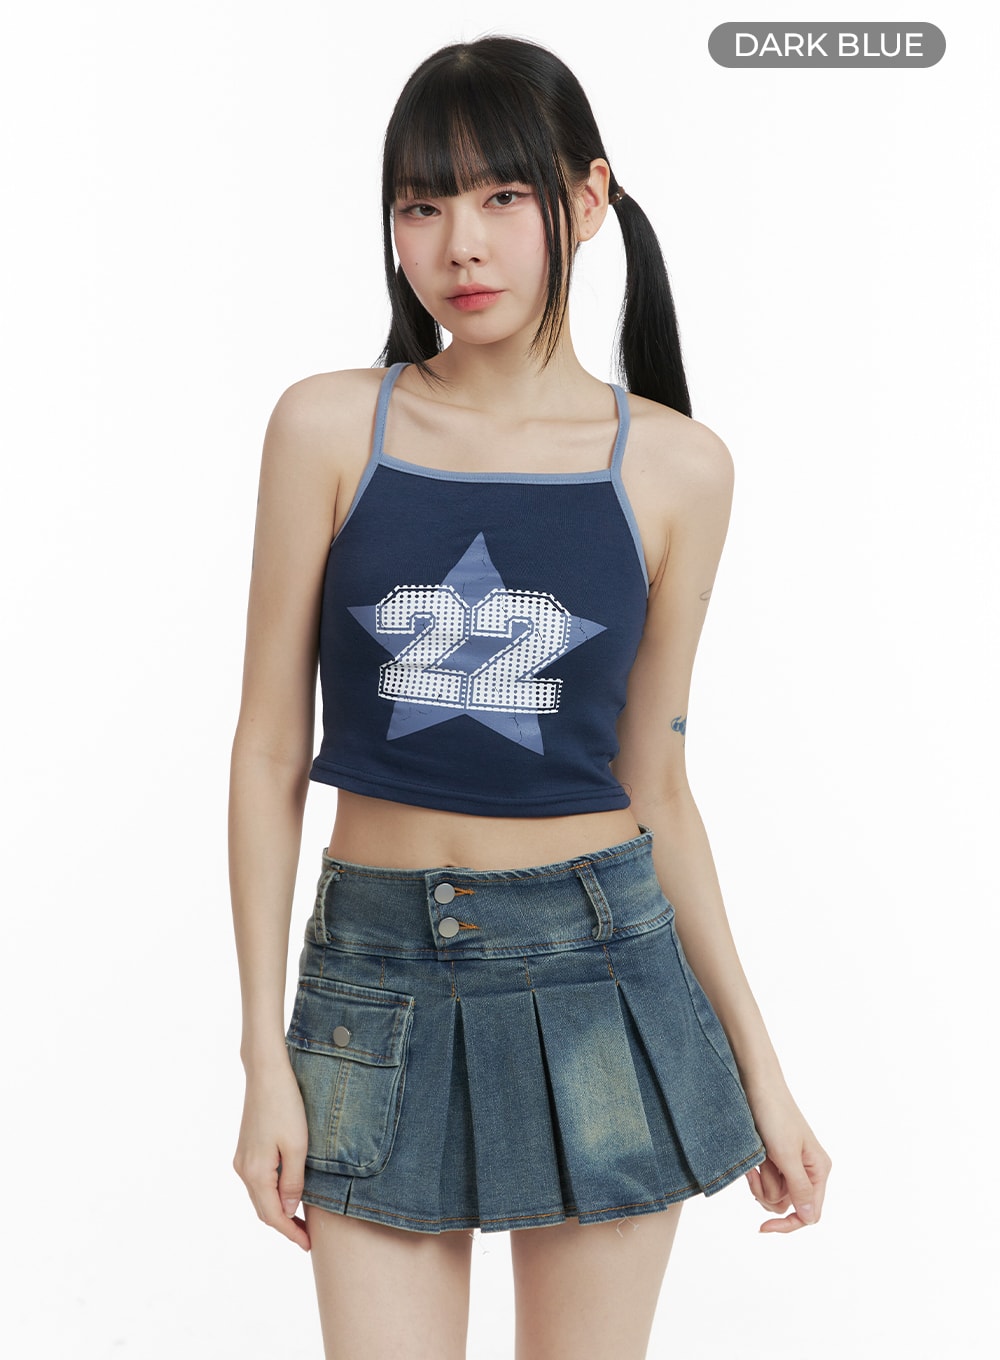 MARCY PADDED THICK STRAP CROP TOP (OXFORD NAVY)